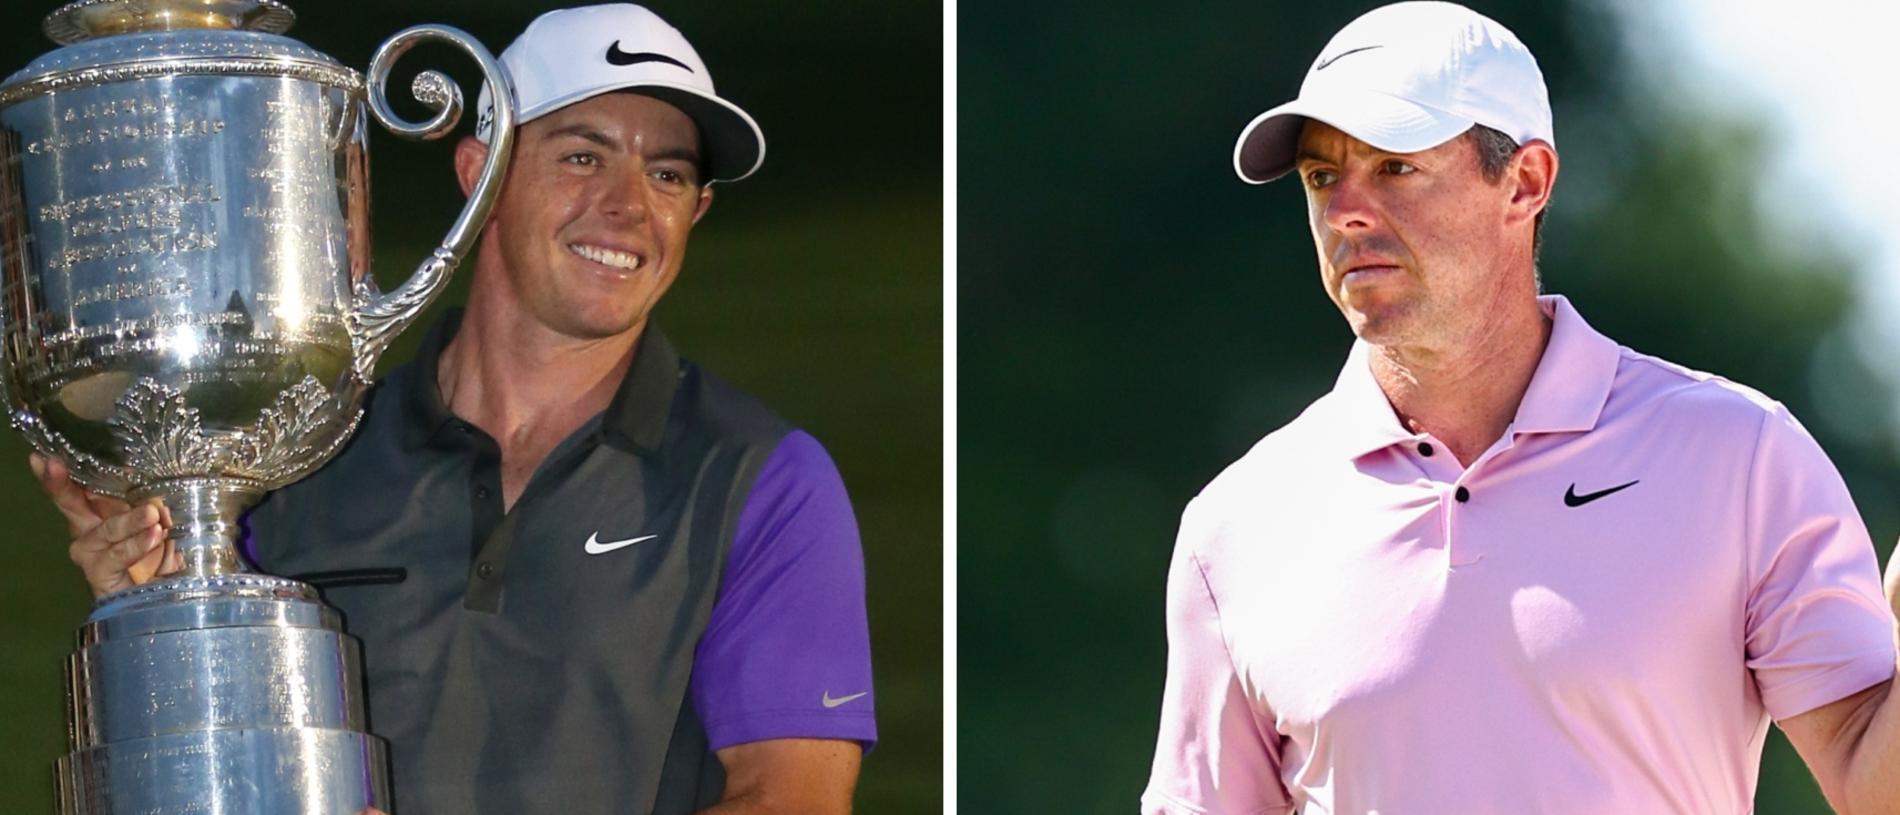 Rory McIlroy 10 years on from PGA